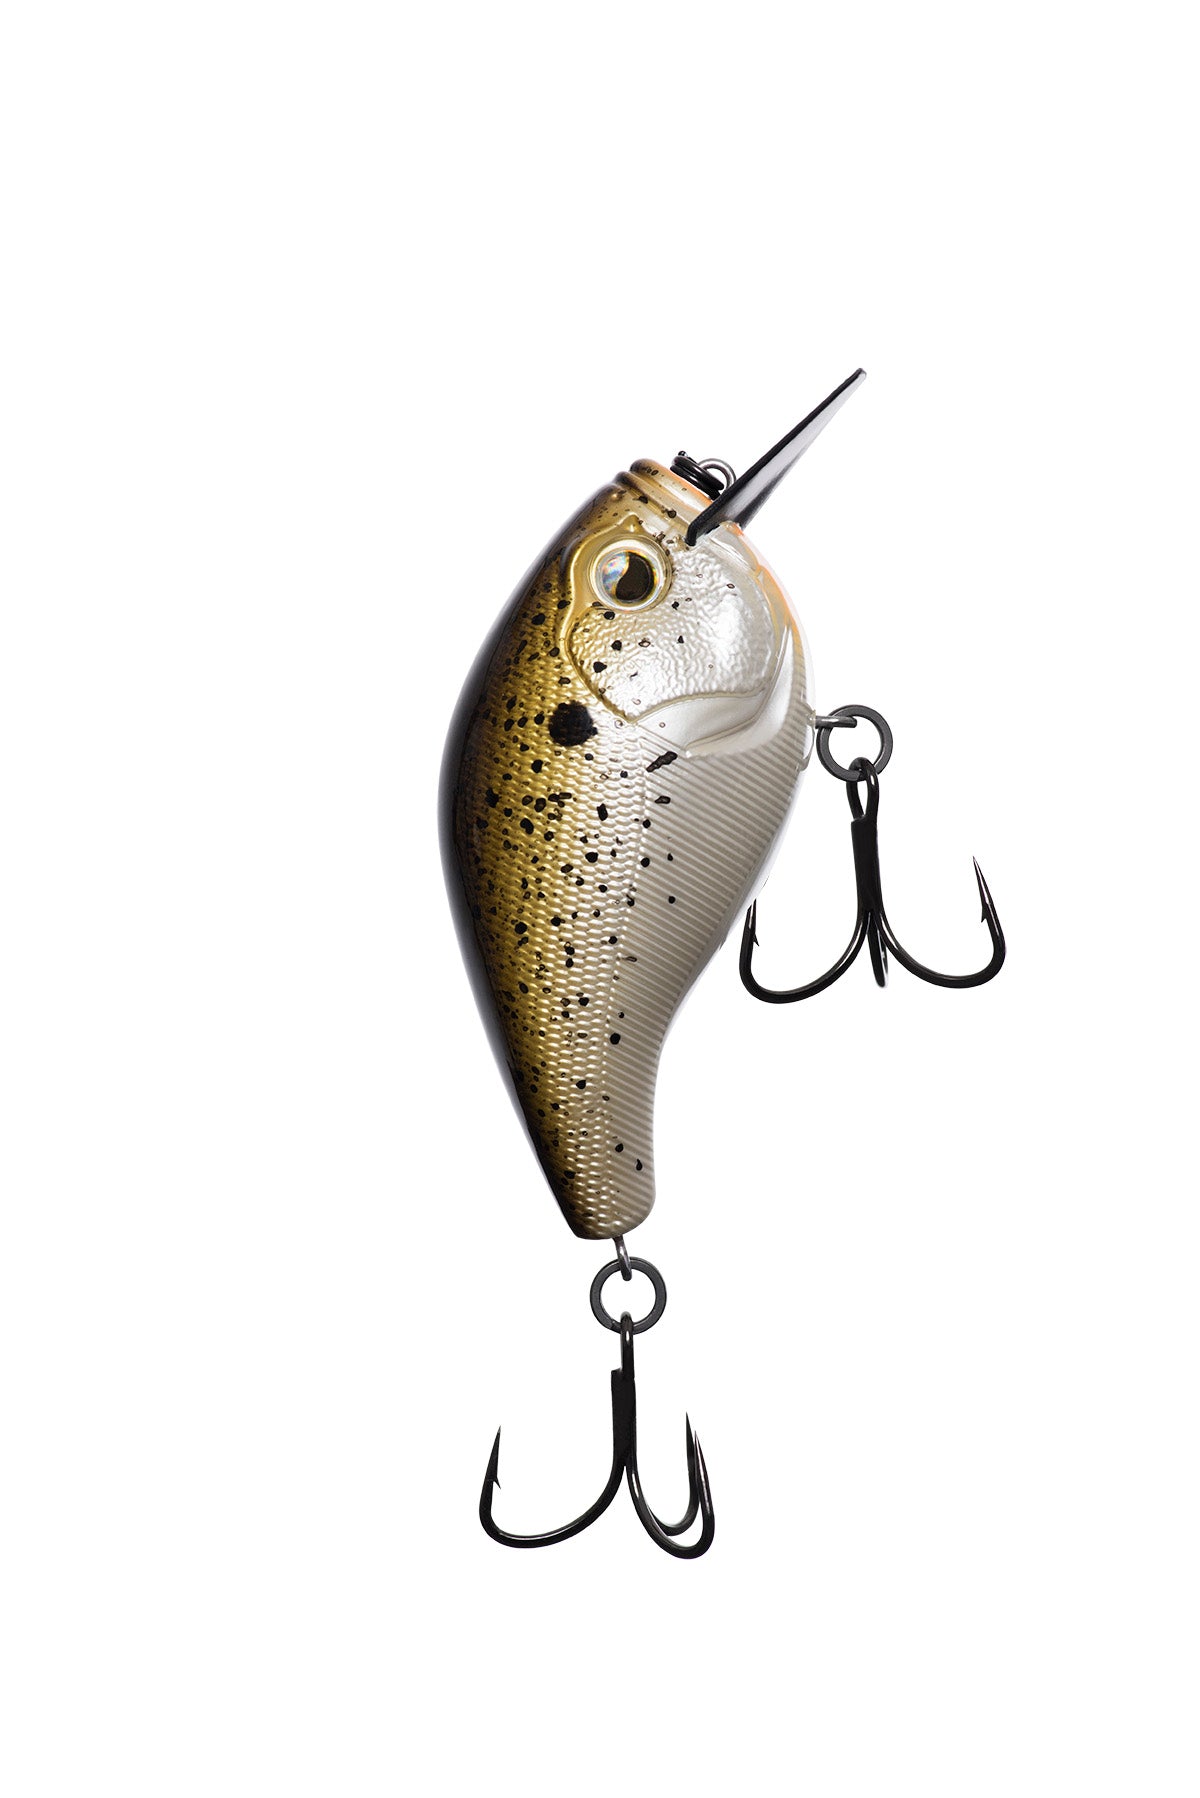 13 FISHING BAIT OLIVE CRUSH / SHADOW SPIN